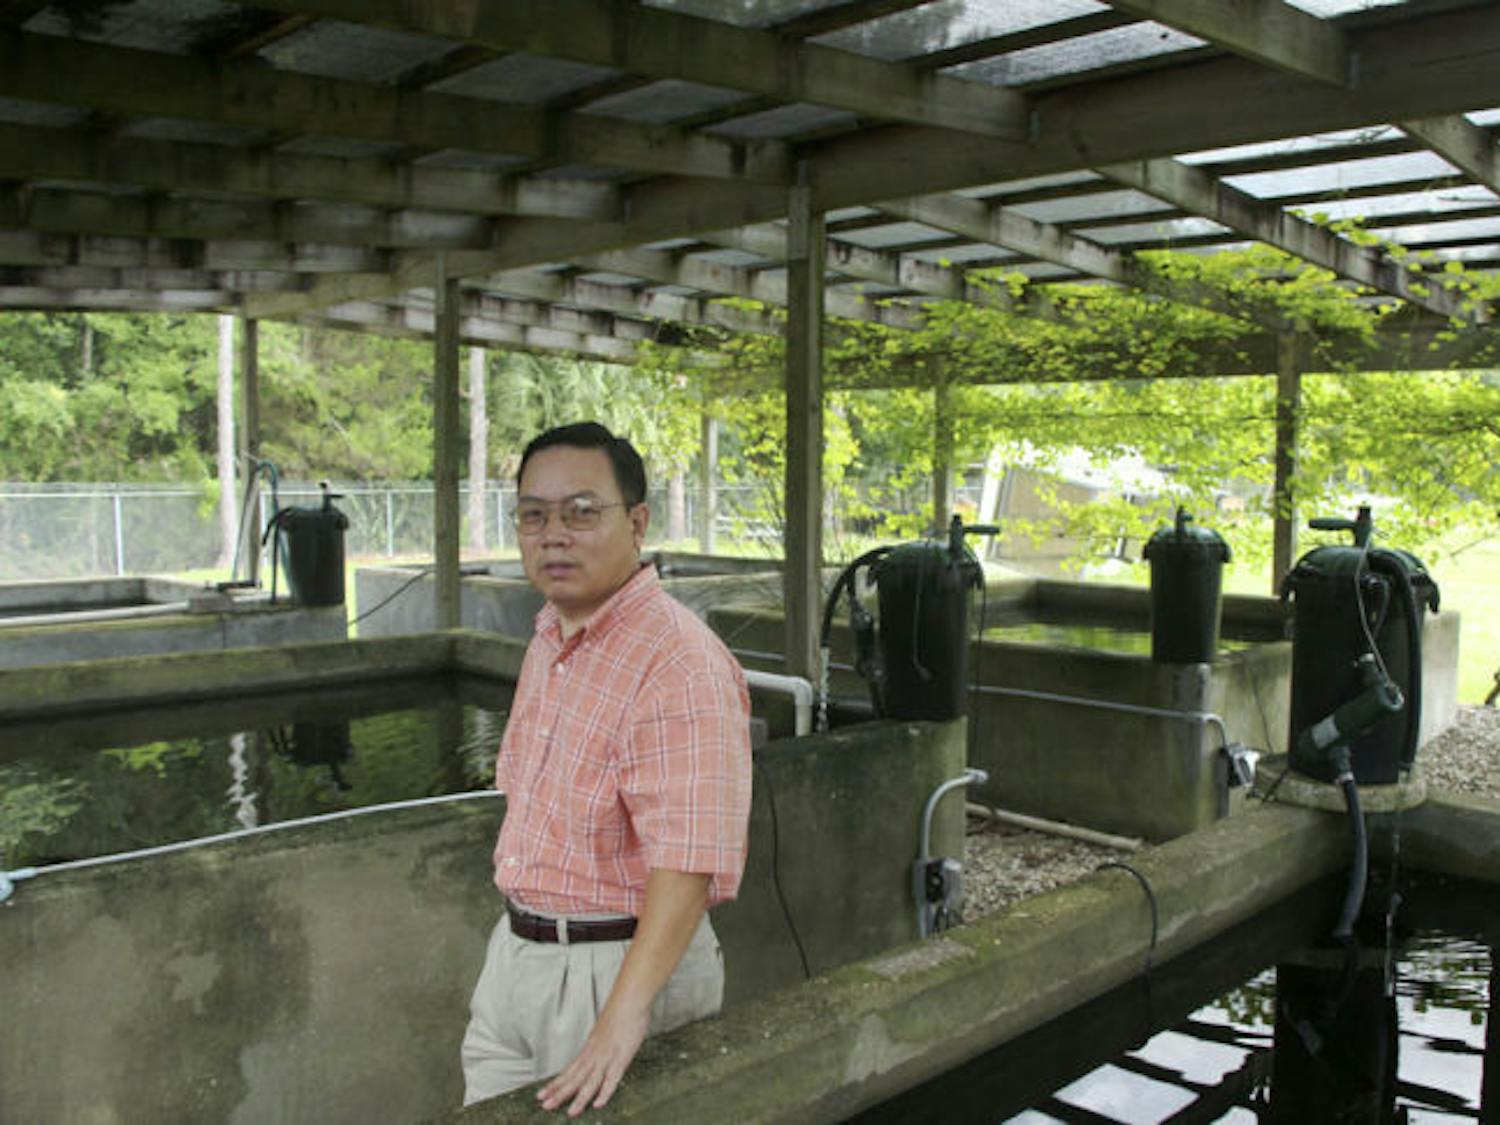 Peter Jiang, an entomologist with Gainesville Mosquito Control, stands next to the service’s stock of mosquito fish. The fish are used as a natural means of killing mosquito larvae.